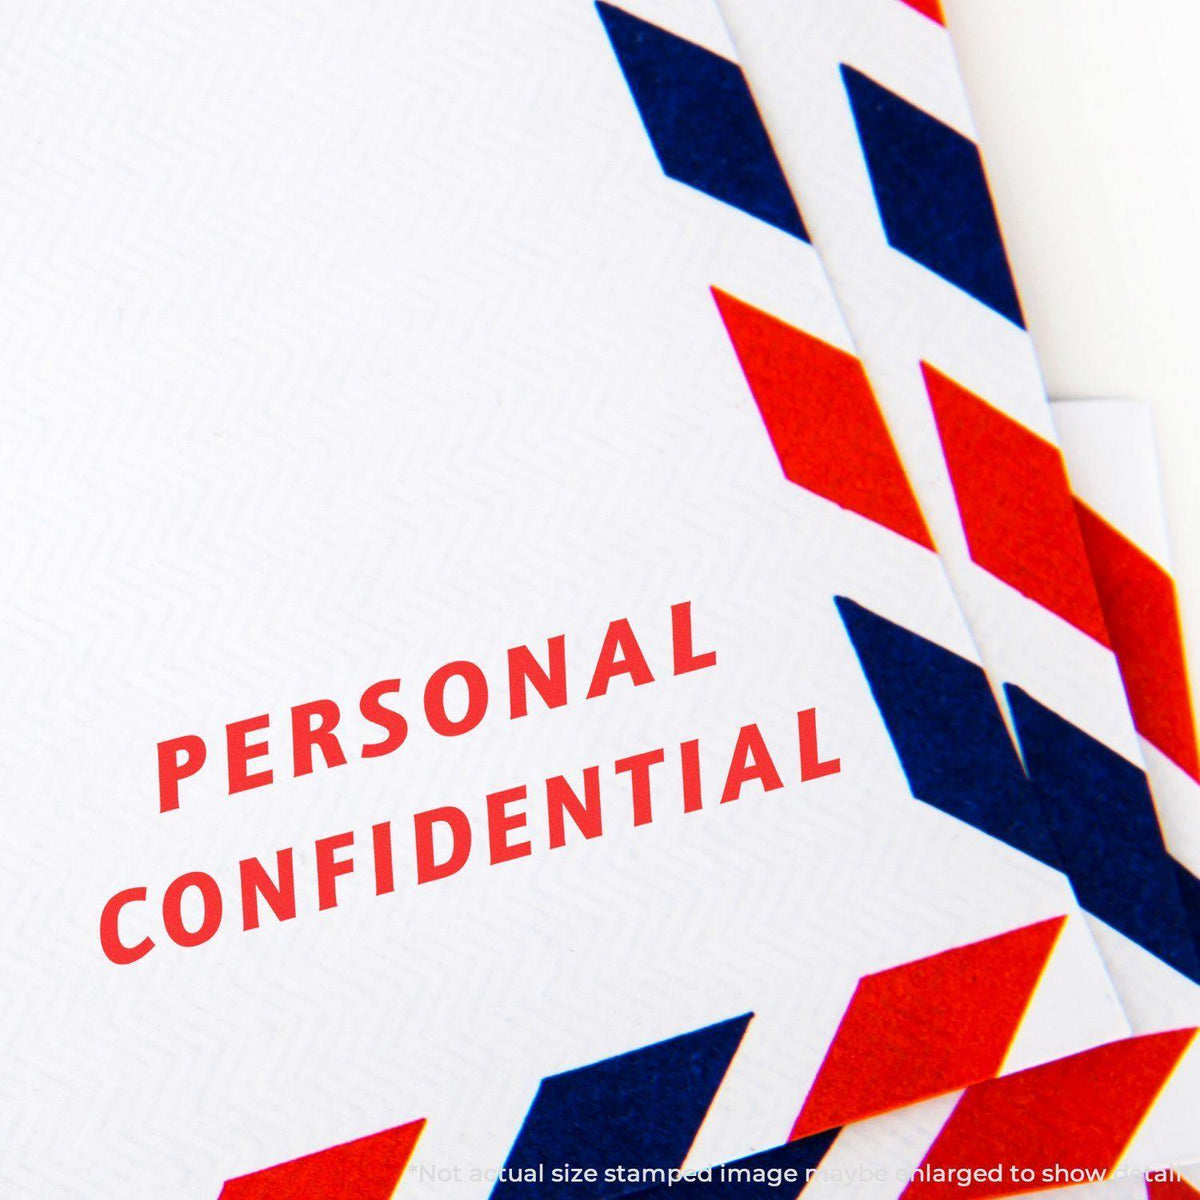 Slim Pre-Inked Italic Personal Confidential Stamp In Use Photo